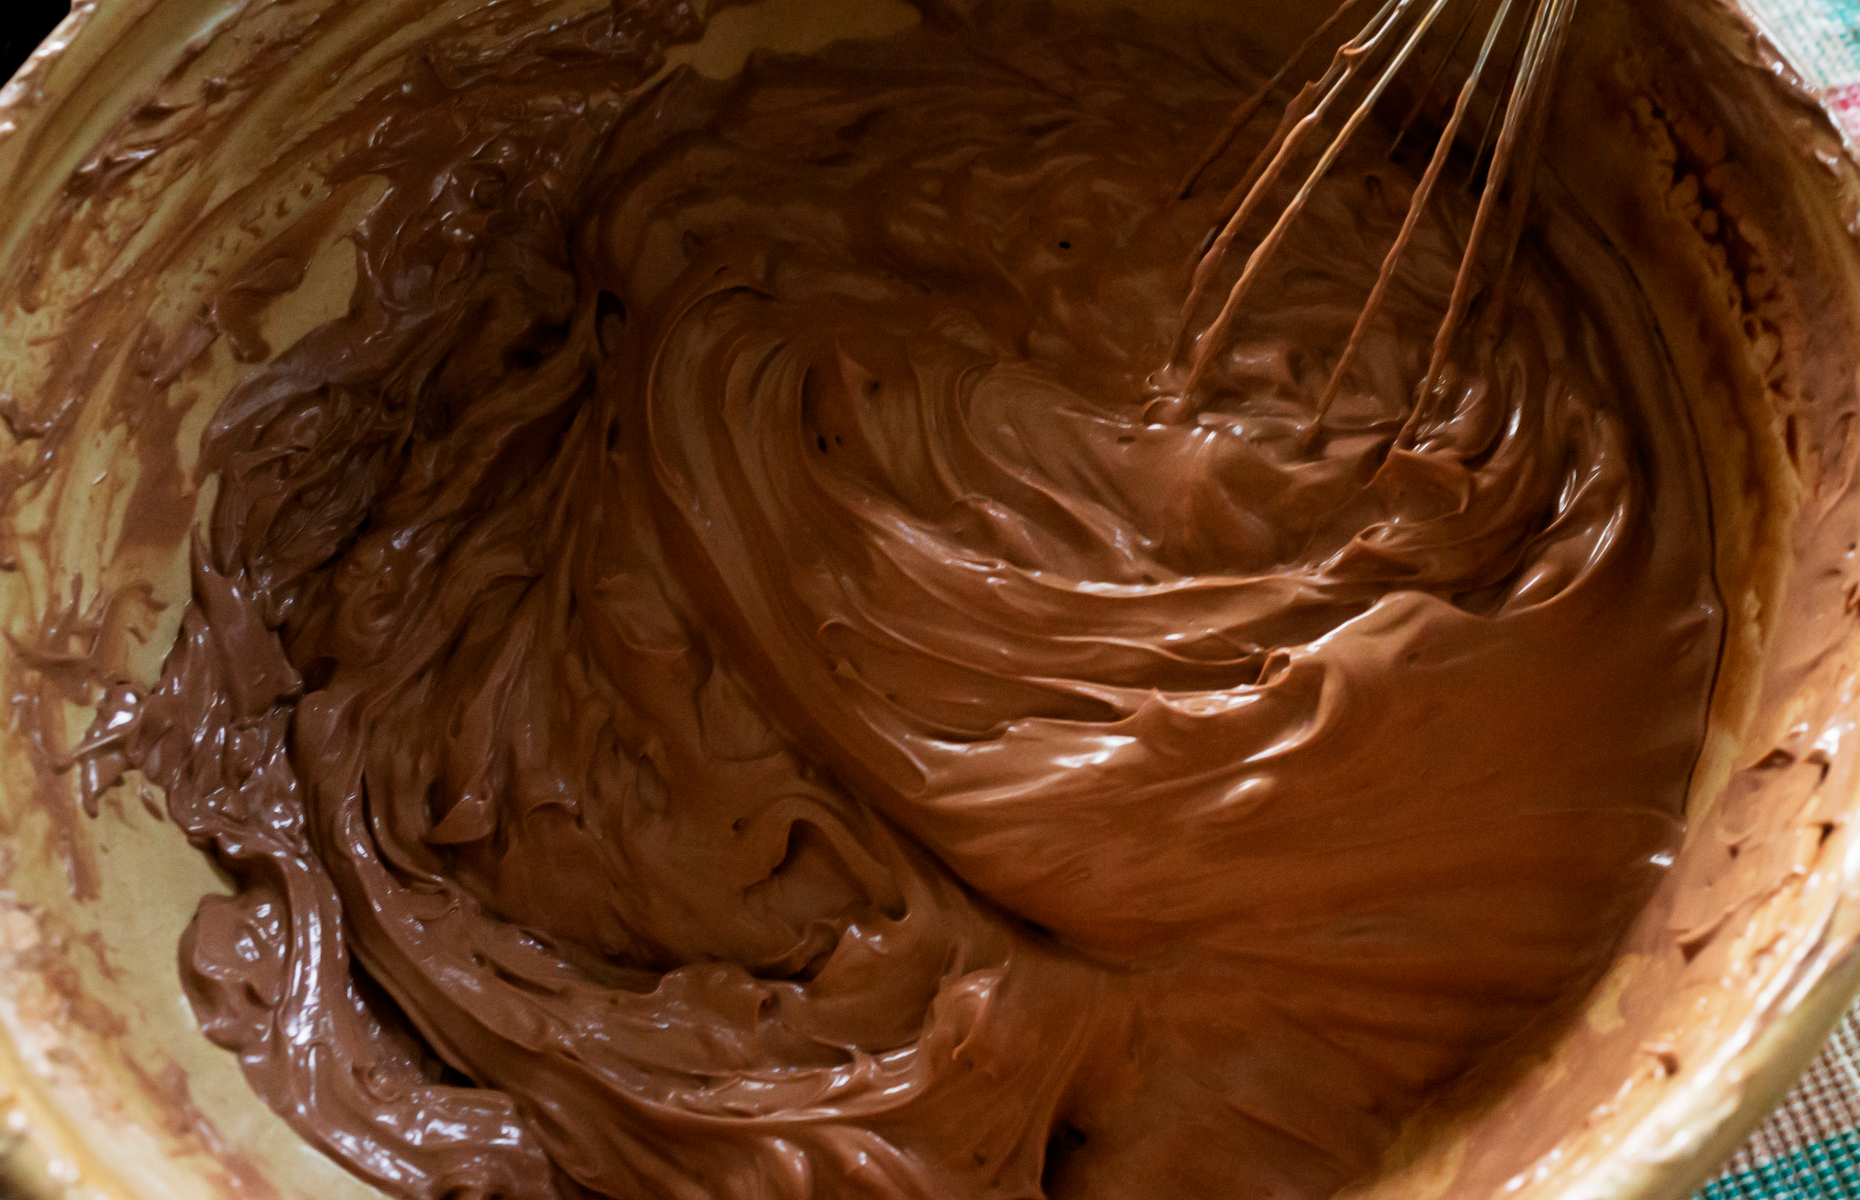 Chocolate mousse mixture (Image: someone who cares/Shutterstock)